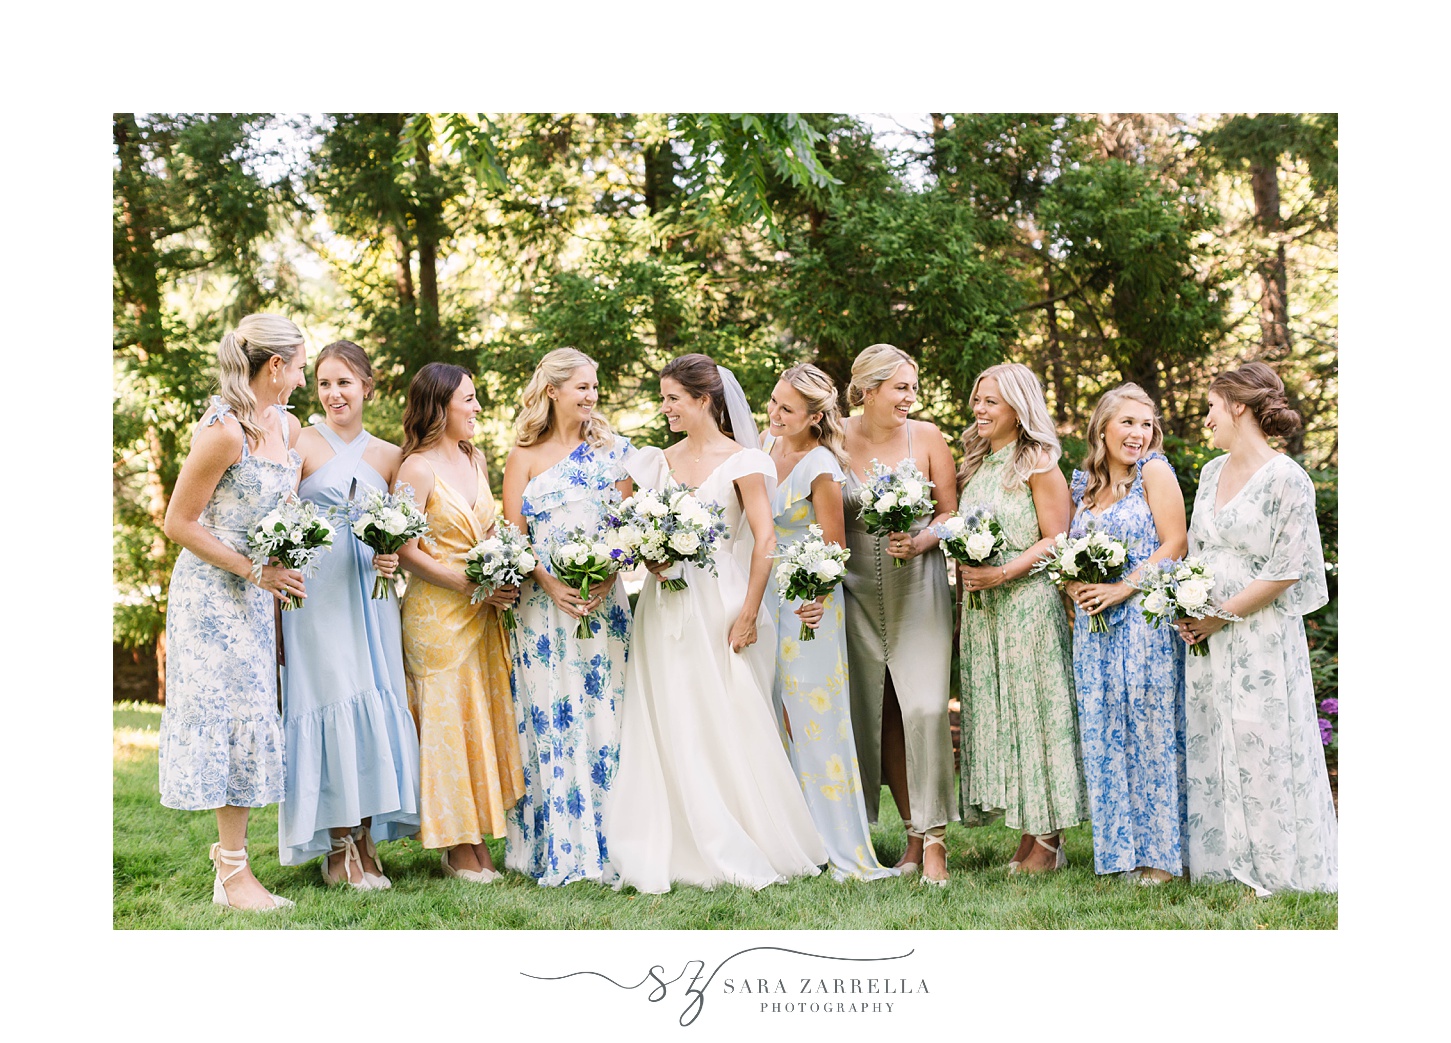 bride poses with bridesmaids in garden party inspired gowns